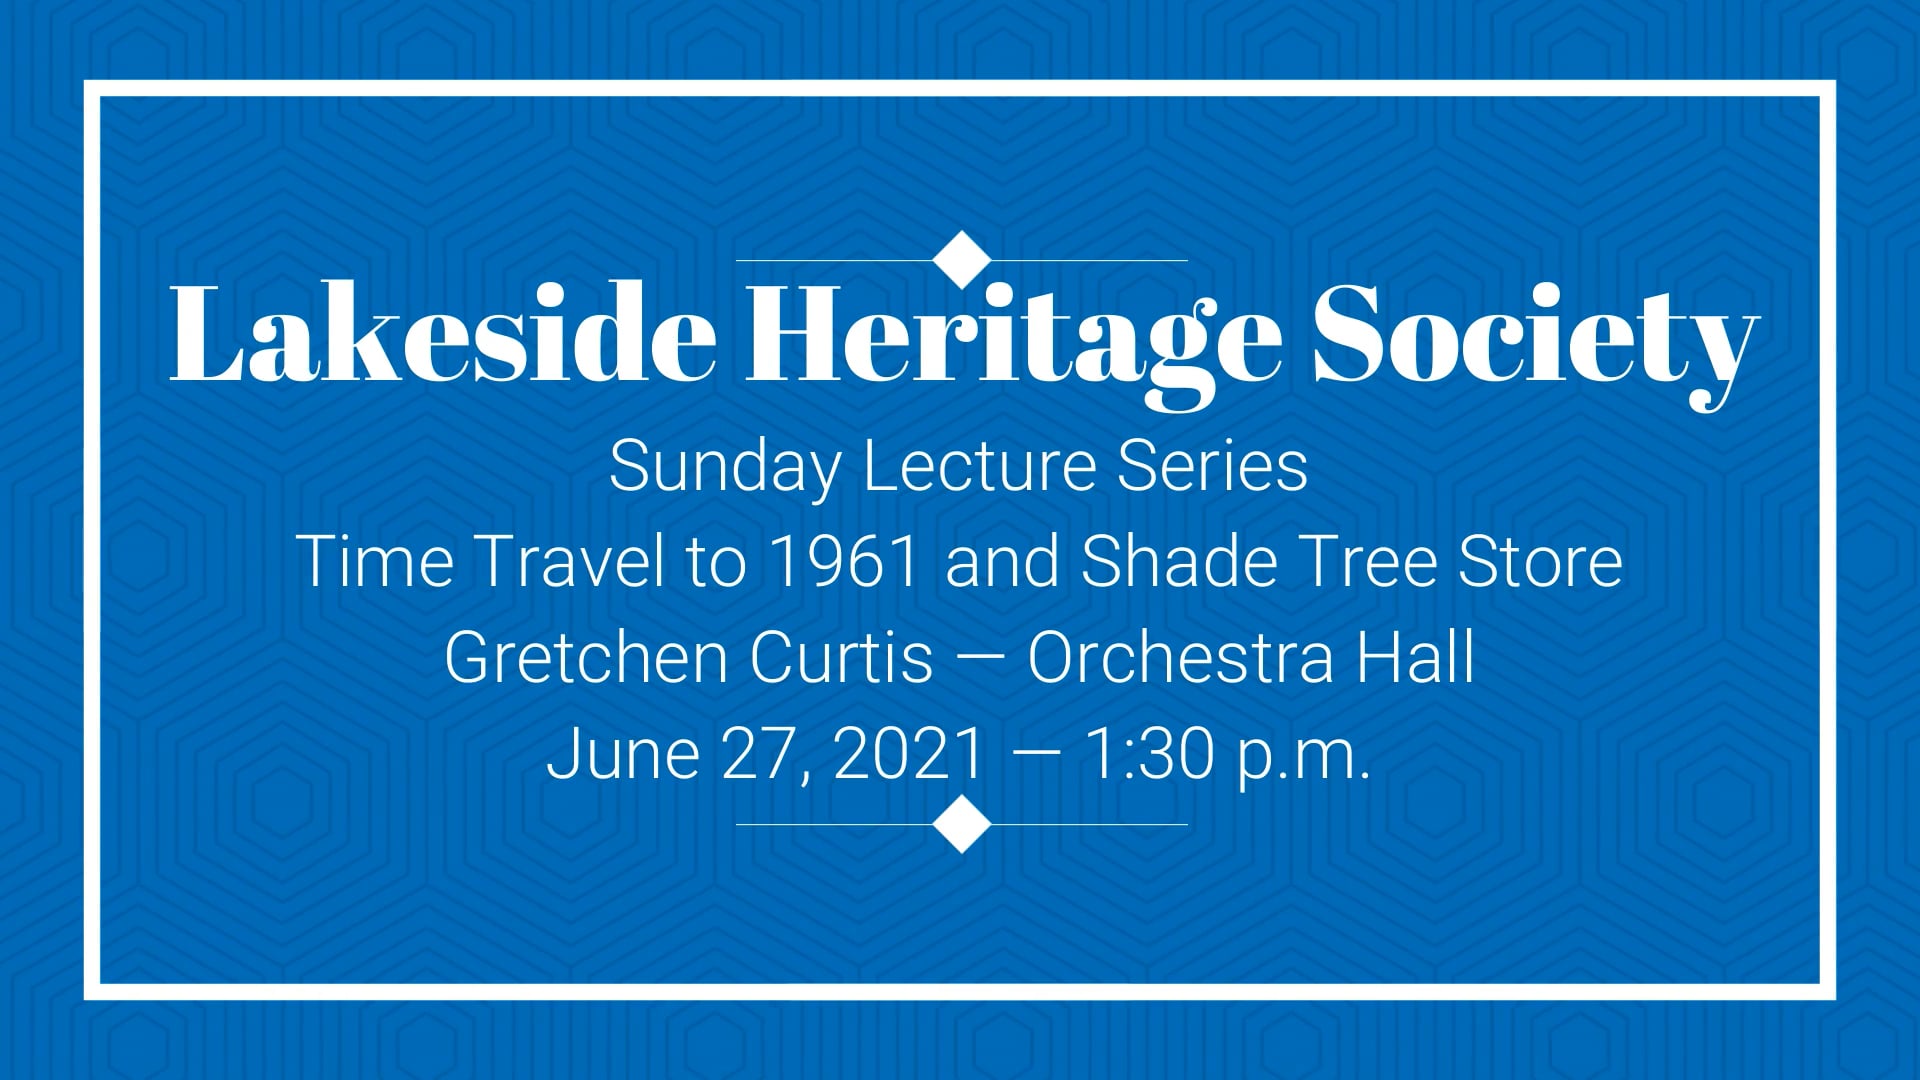 LHS Sunday Lecture June 27, 2021: "Time Travel to 1961" and "Lakeside Newsstand"